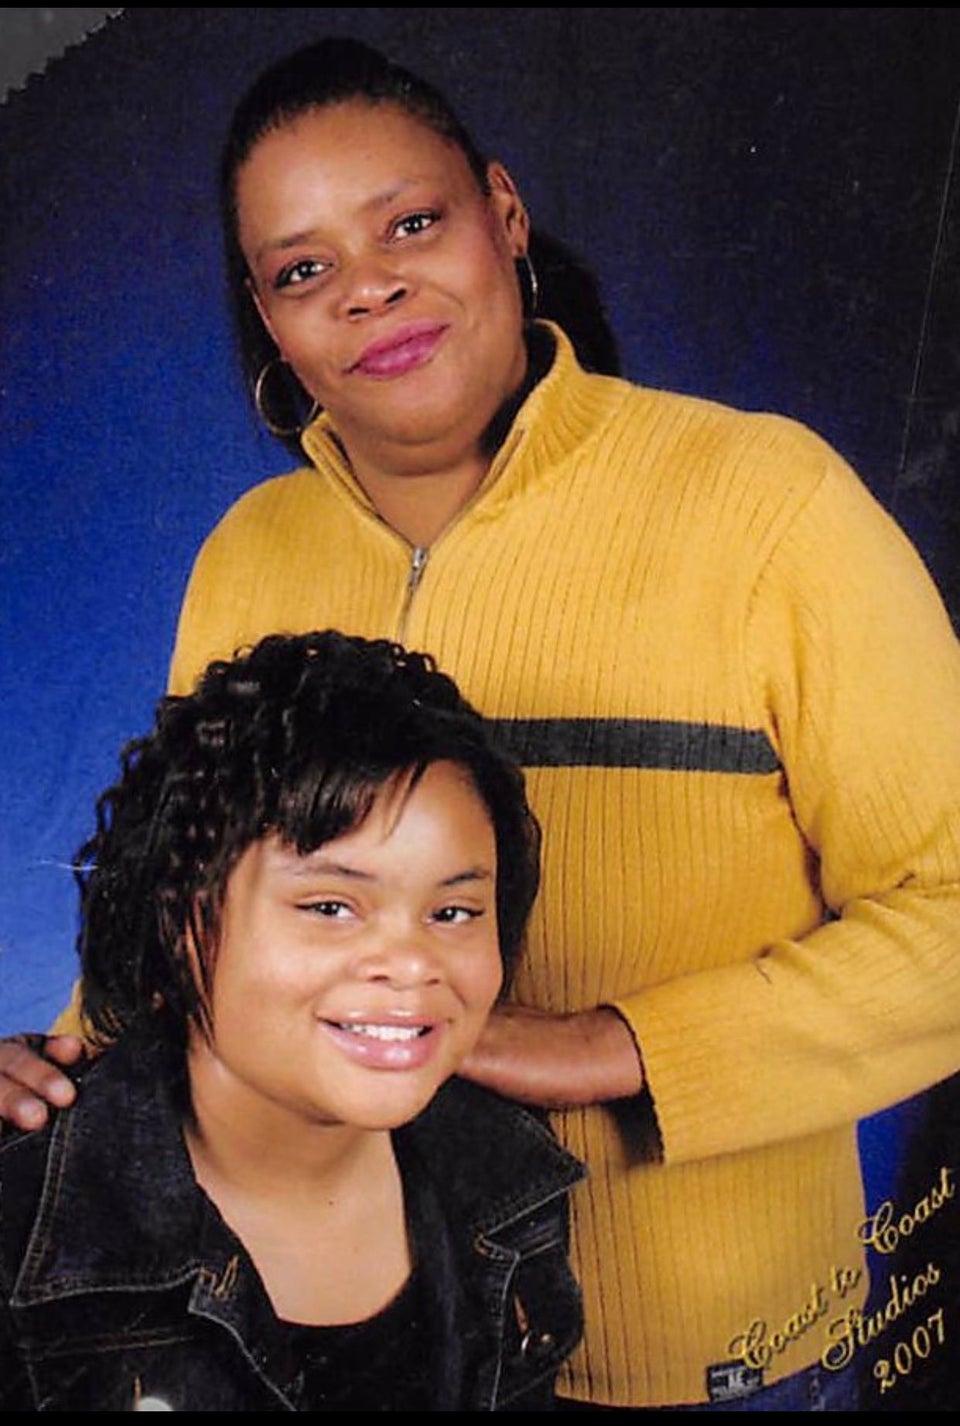 Mother Of Atatiana Jefferson Dies Months After Her Daughter’s Killing